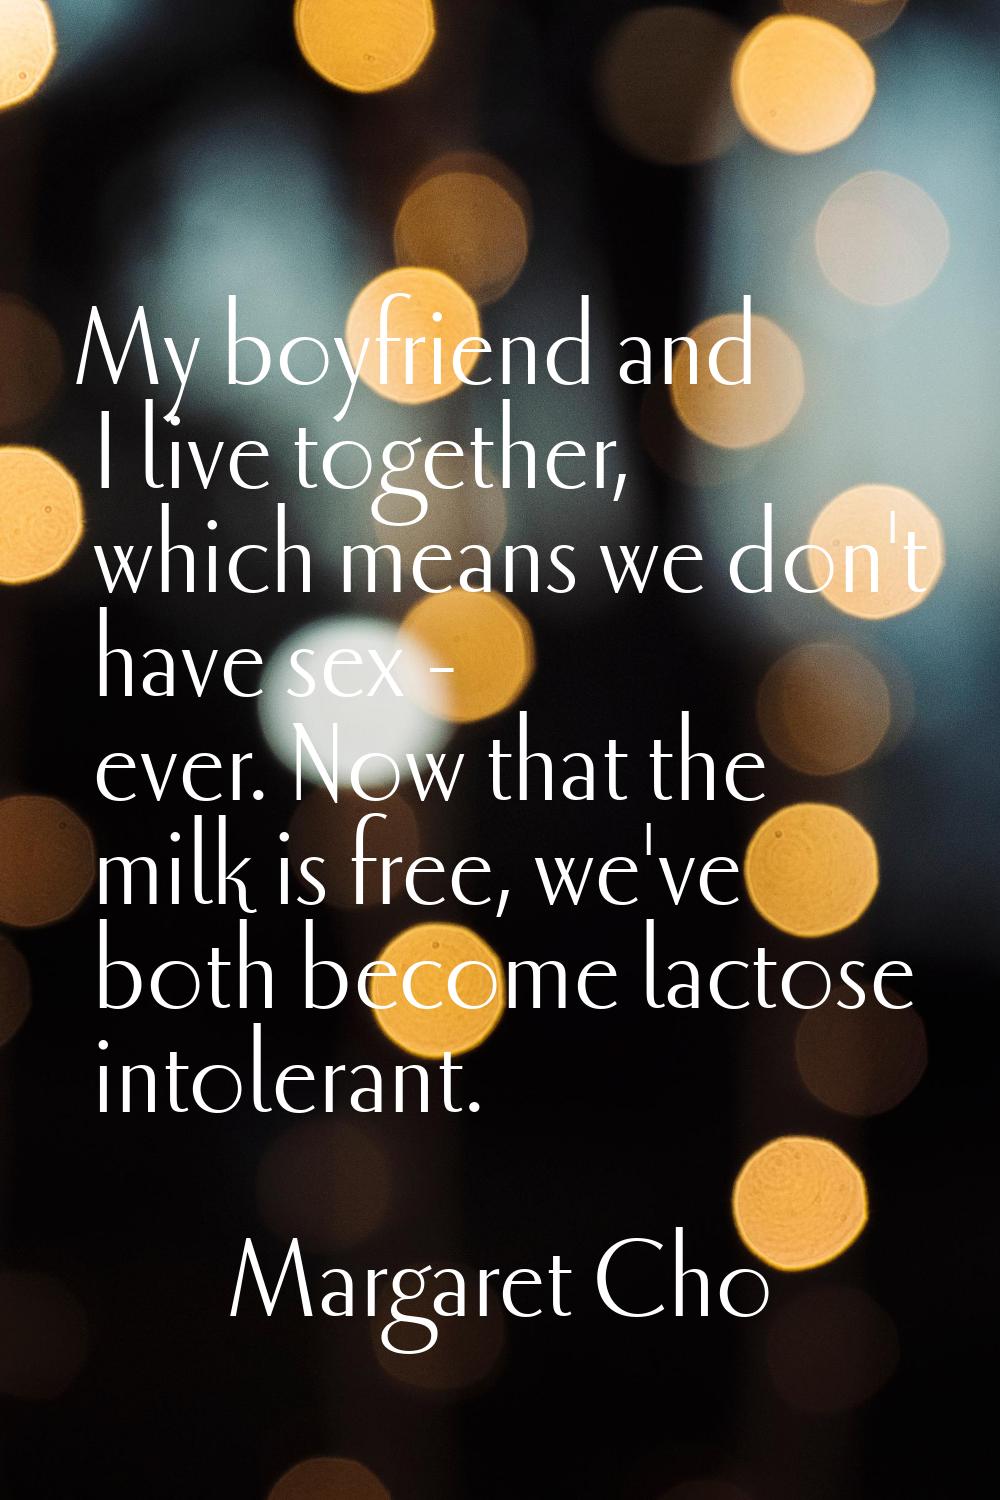 My boyfriend and I live together, which means we don't have sex - ever. Now that the milk is free, 